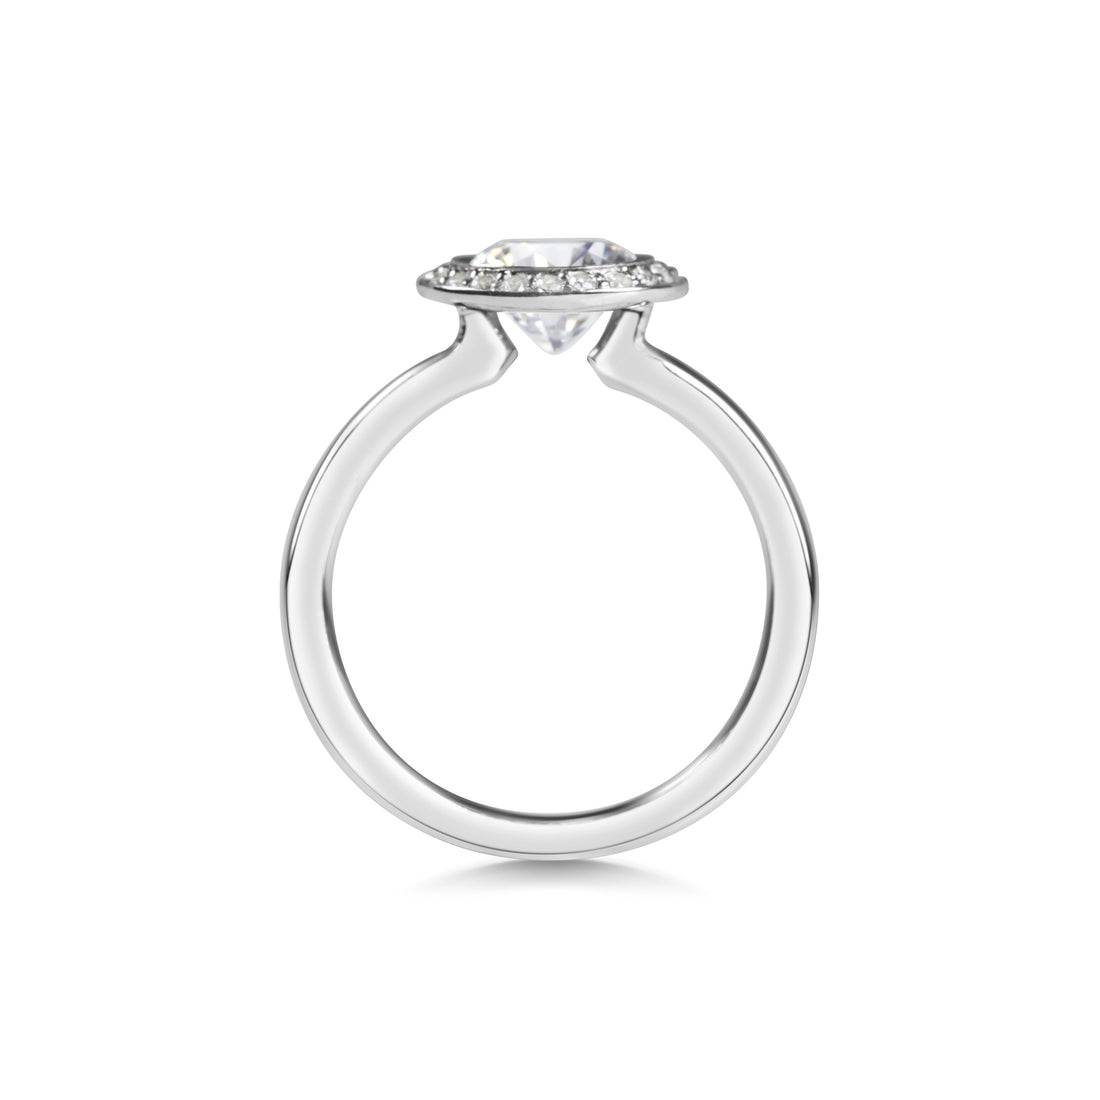  Large Diamond Halo Ring by Michelle Oh | The Cut London